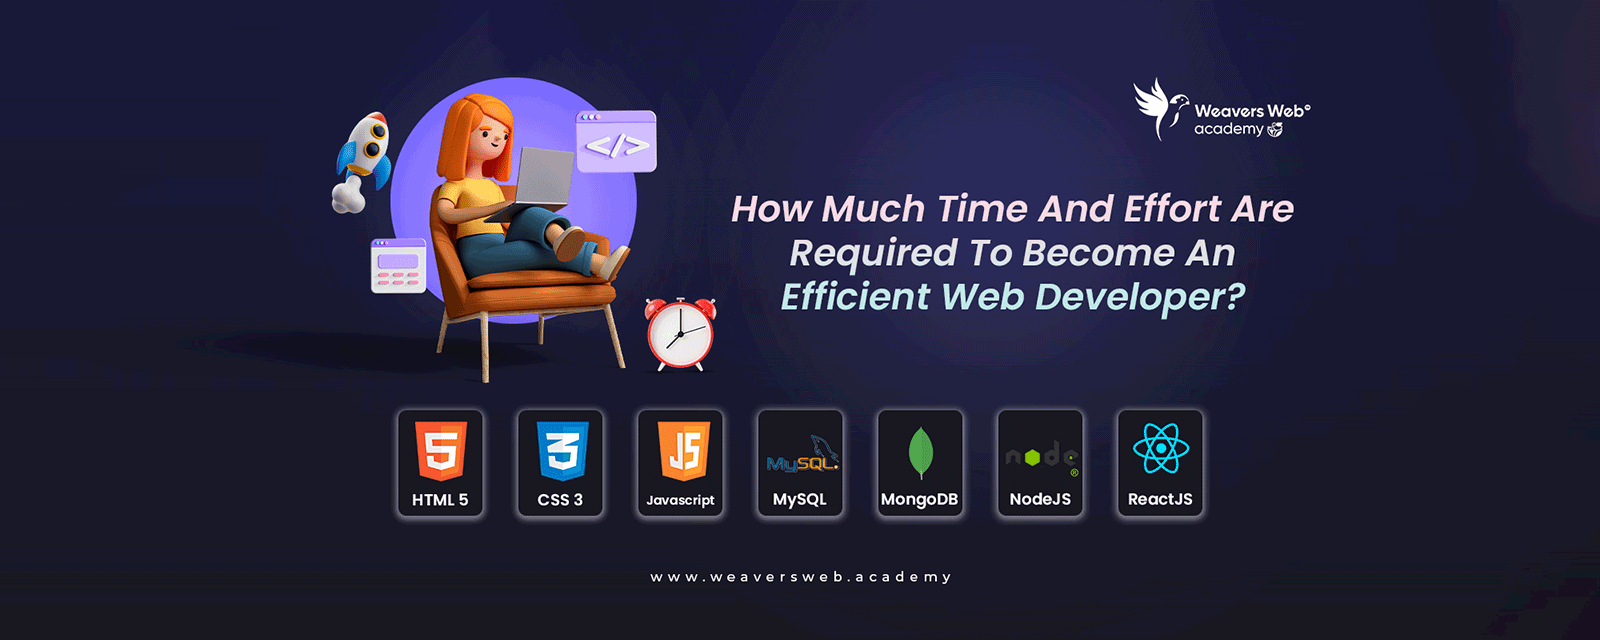 How much time and effort are required to become an efficient web developer?